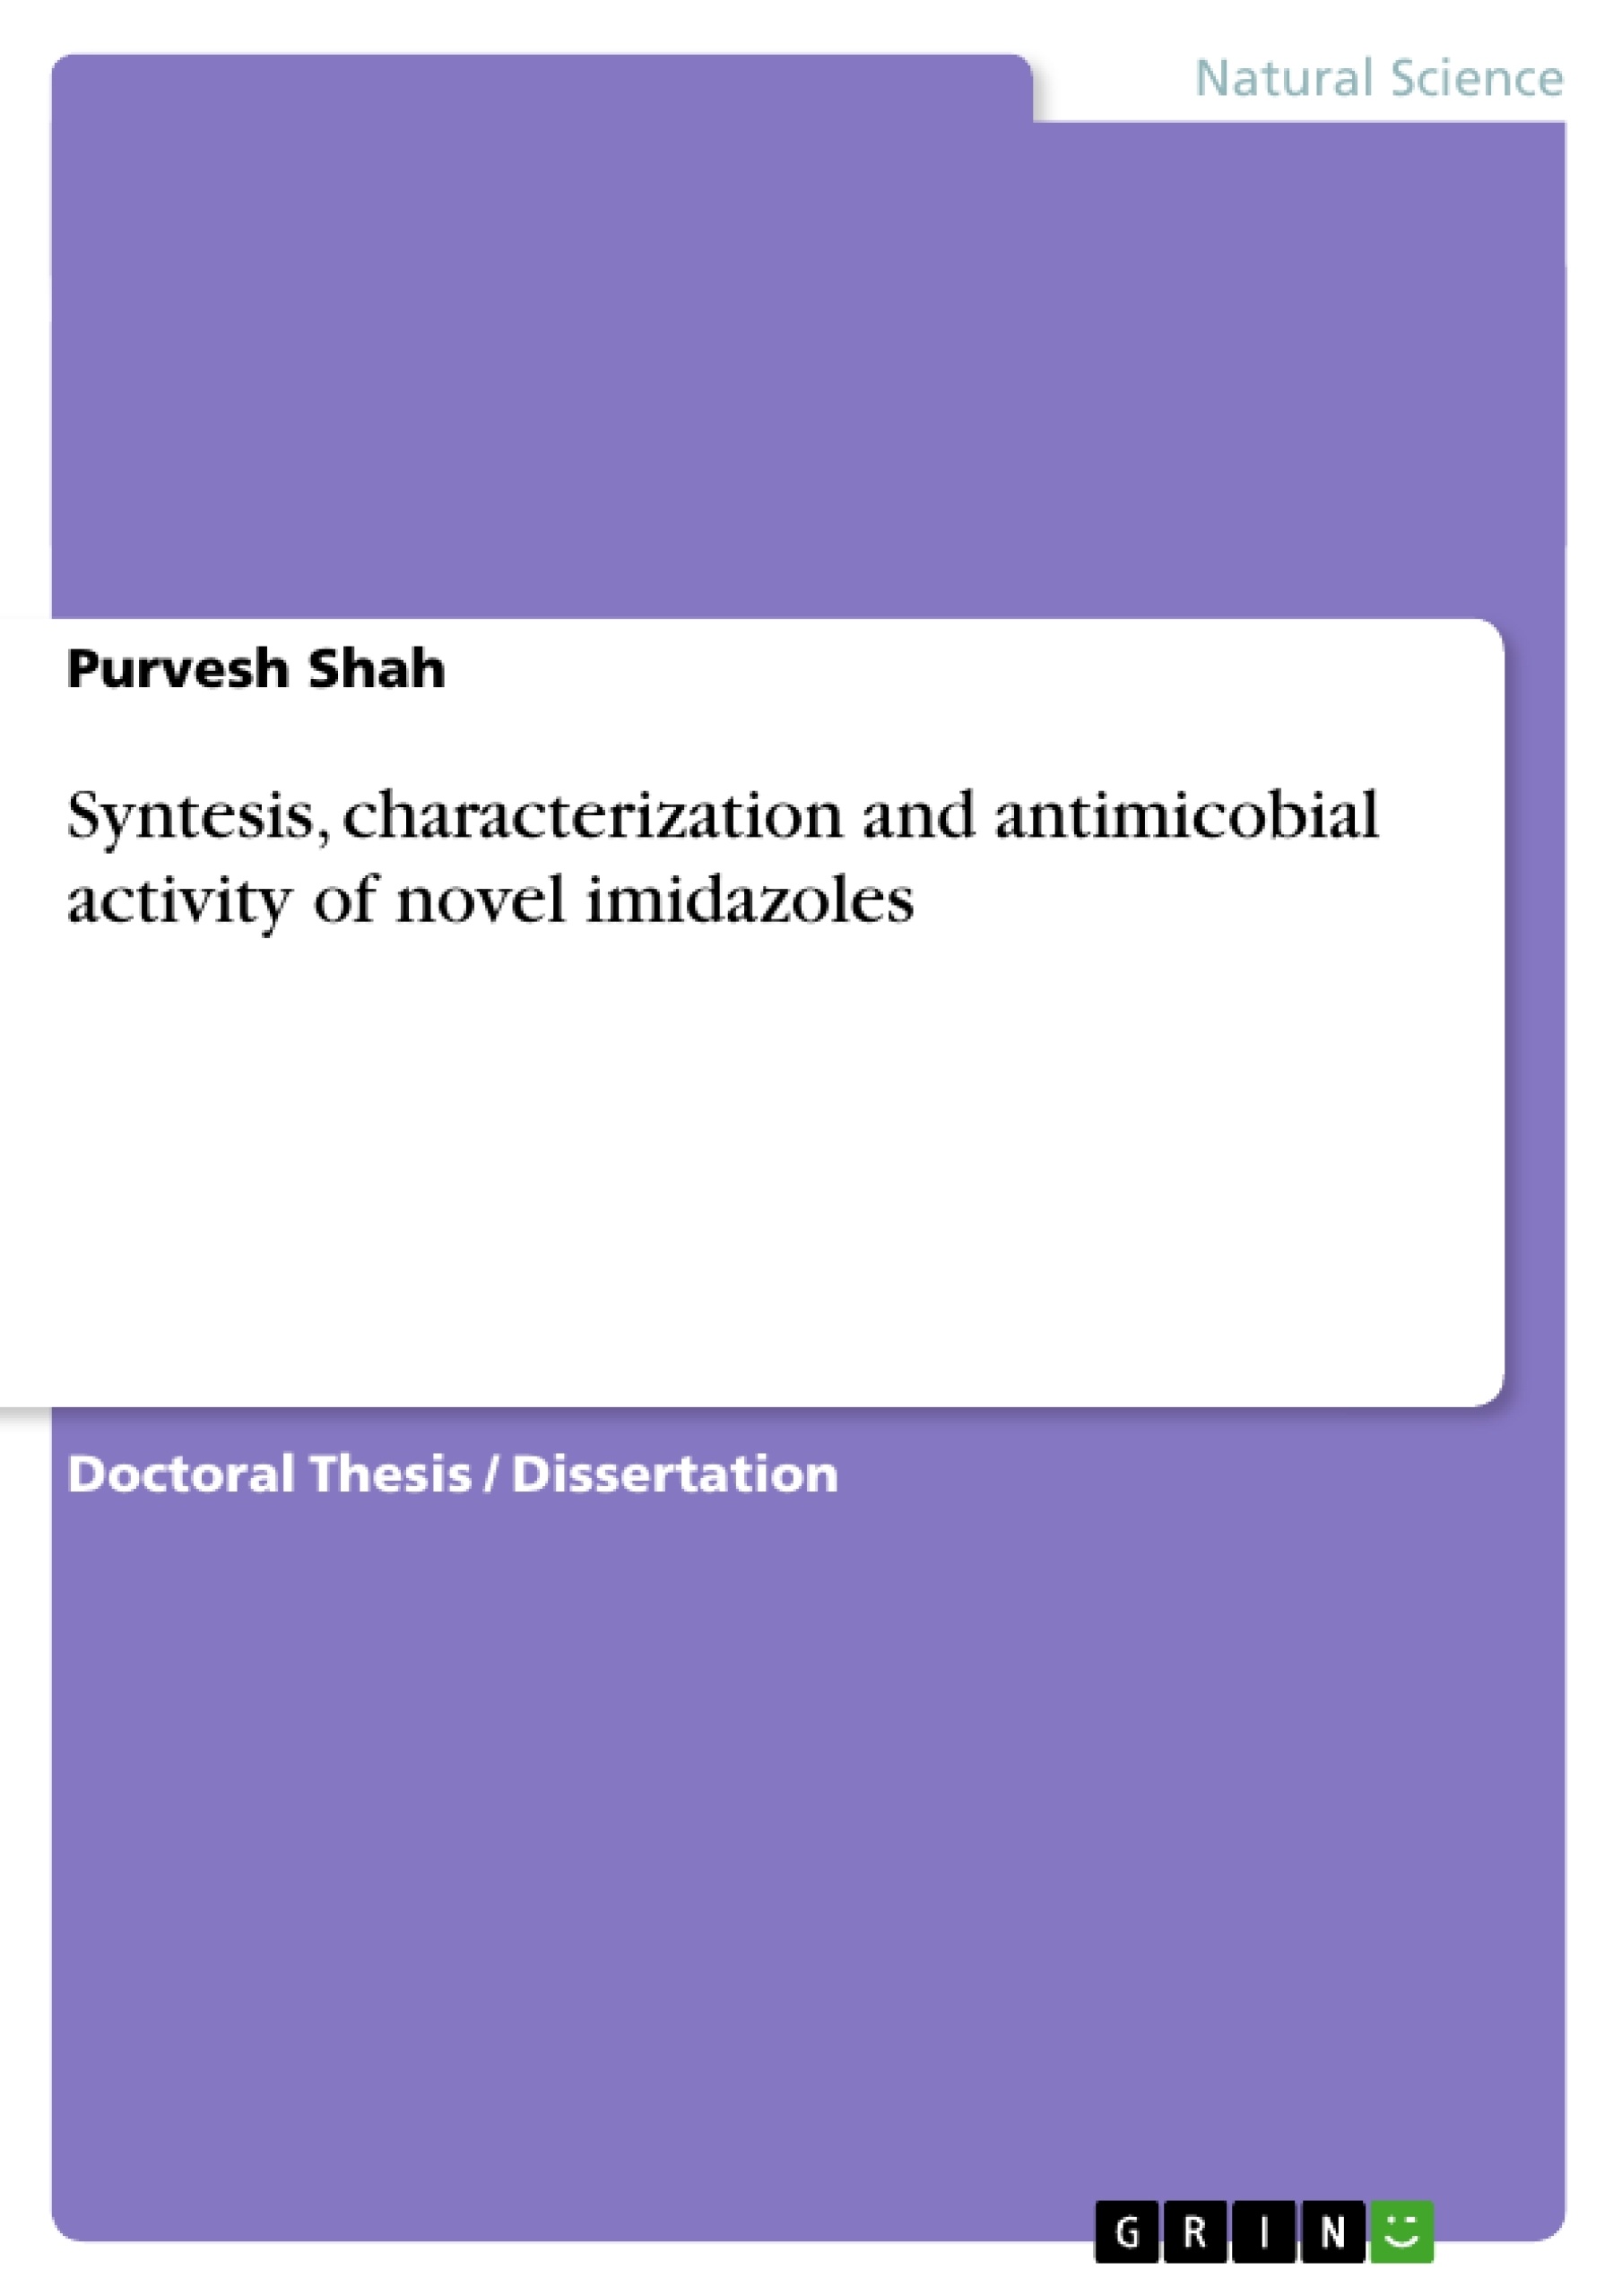 Title: Syntesis, characterization and antimicobial activity of novel imidazoles